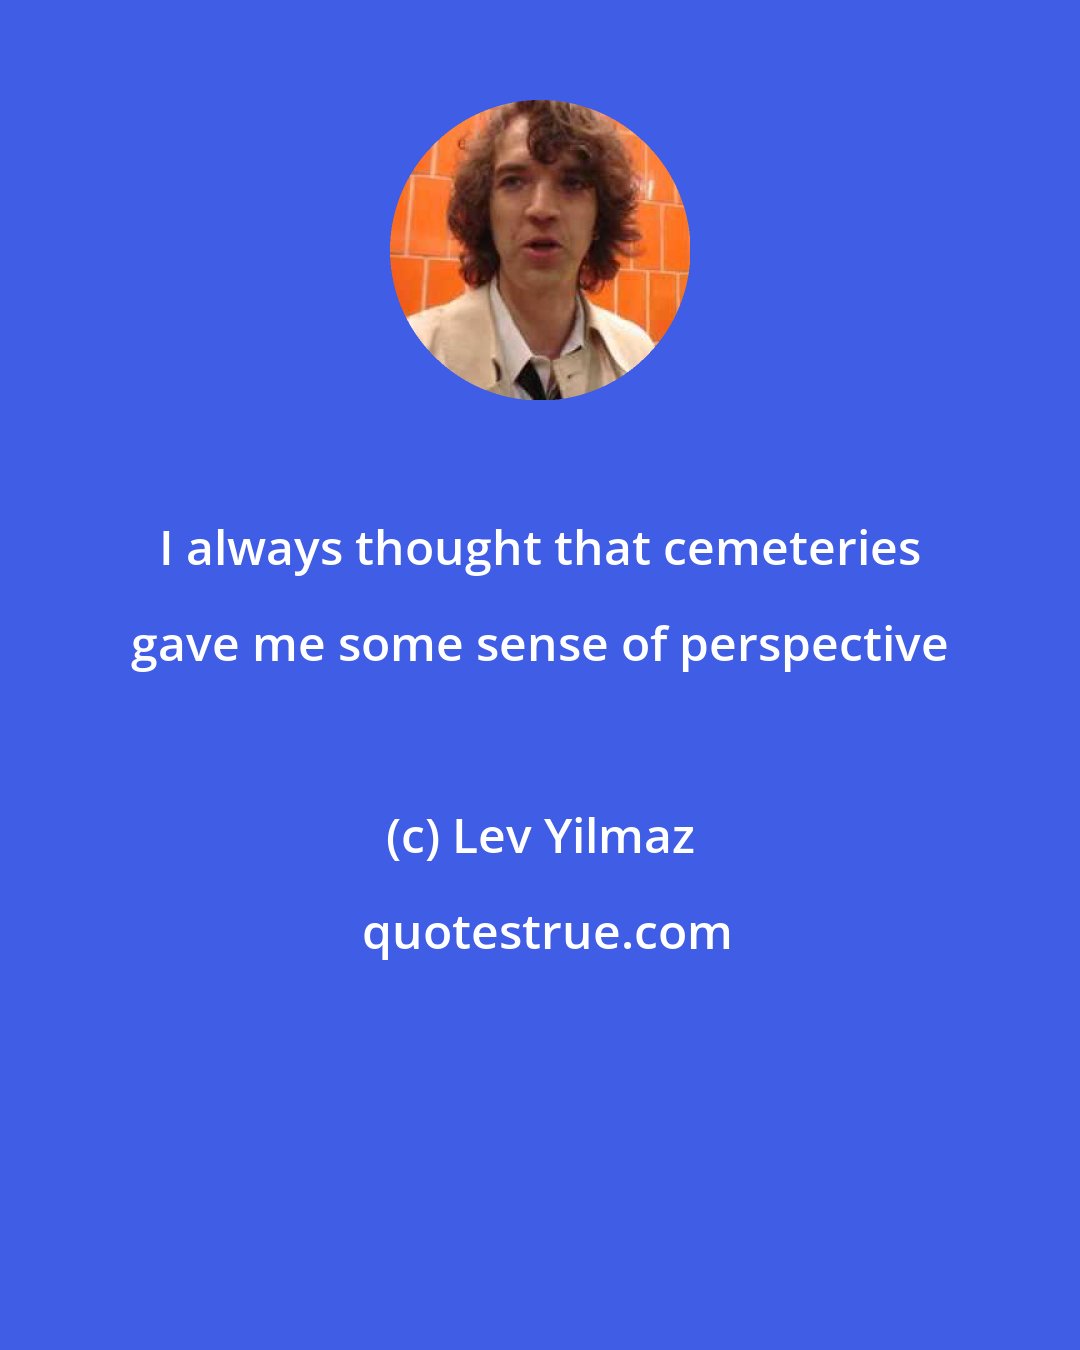 Lev Yilmaz: I always thought that cemeteries gave me some sense of perspective